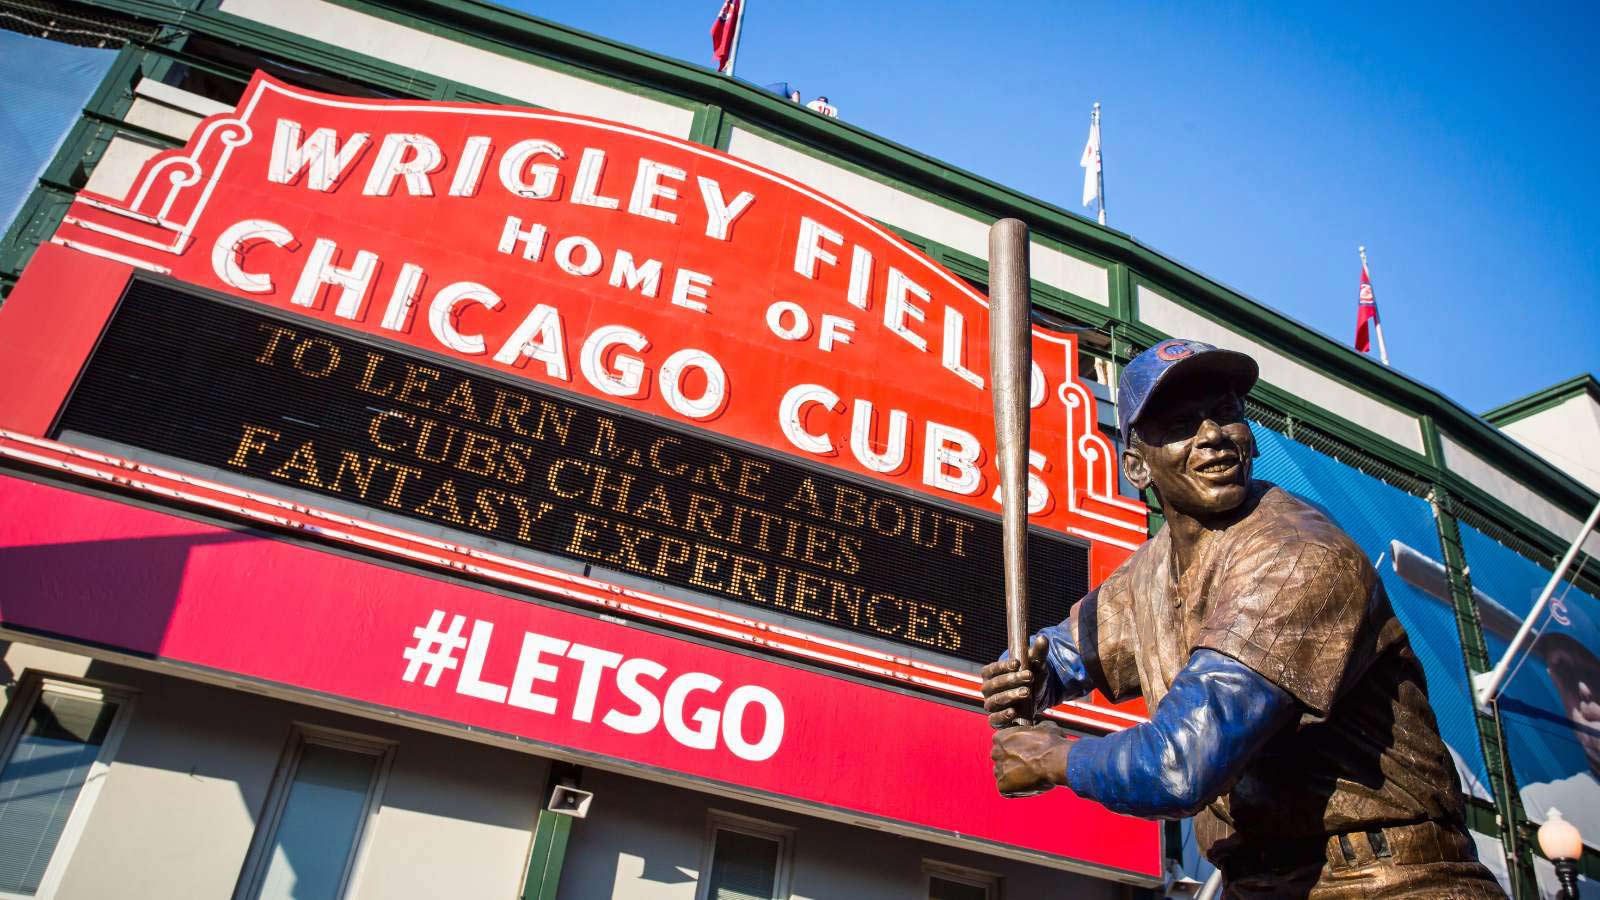 <p>Staying in Chicago? Check out Wrigley Field, the iconic baseball stadium where the Cubs play. Known for its ivy-covered brick outfield wall, the stadium was bought by giant chewing gum businessman William Wrigley Jr. in 1921. It was initially named Cubs Park before being renamed Wrigley Field in 1927. If you want to see a baseball game, this is one of the best places to do it.</p>